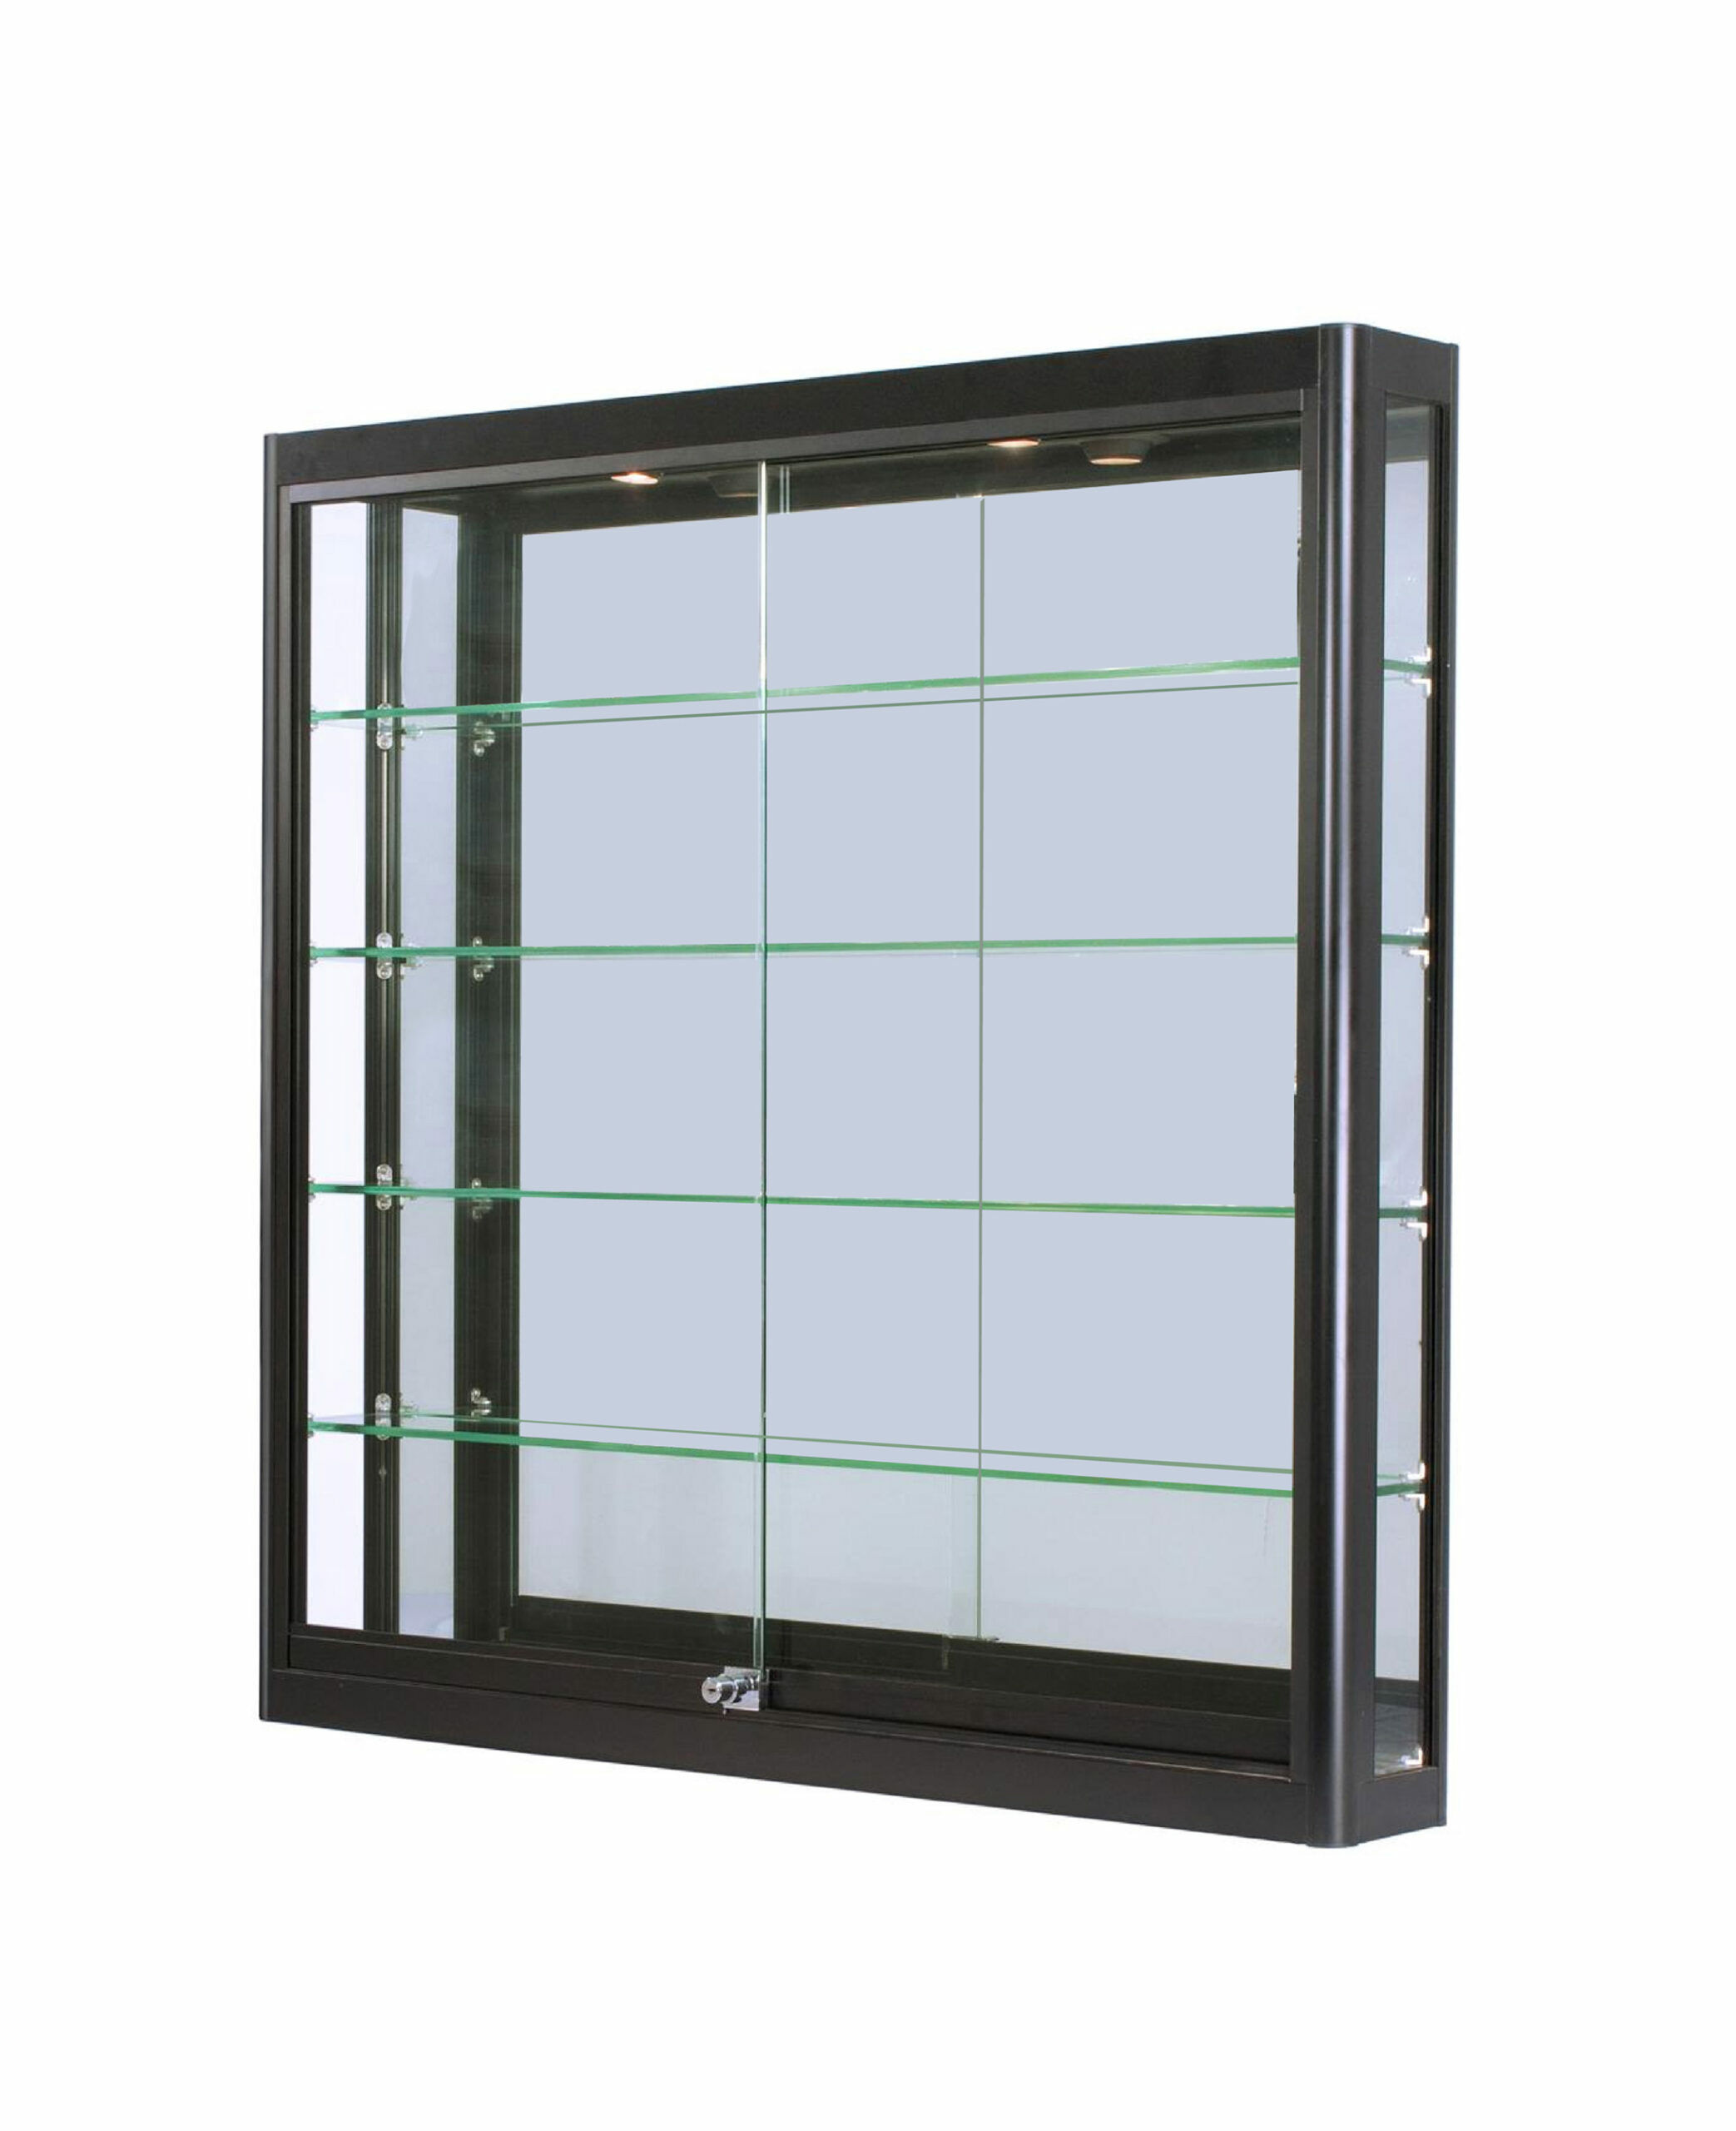 The 40" aluminum framed wall showcase features 4-adjustable tempered glass shelves that are 14" D.  The front sliding doors come with a lock and keys, mirrored back panels and LED lights. 